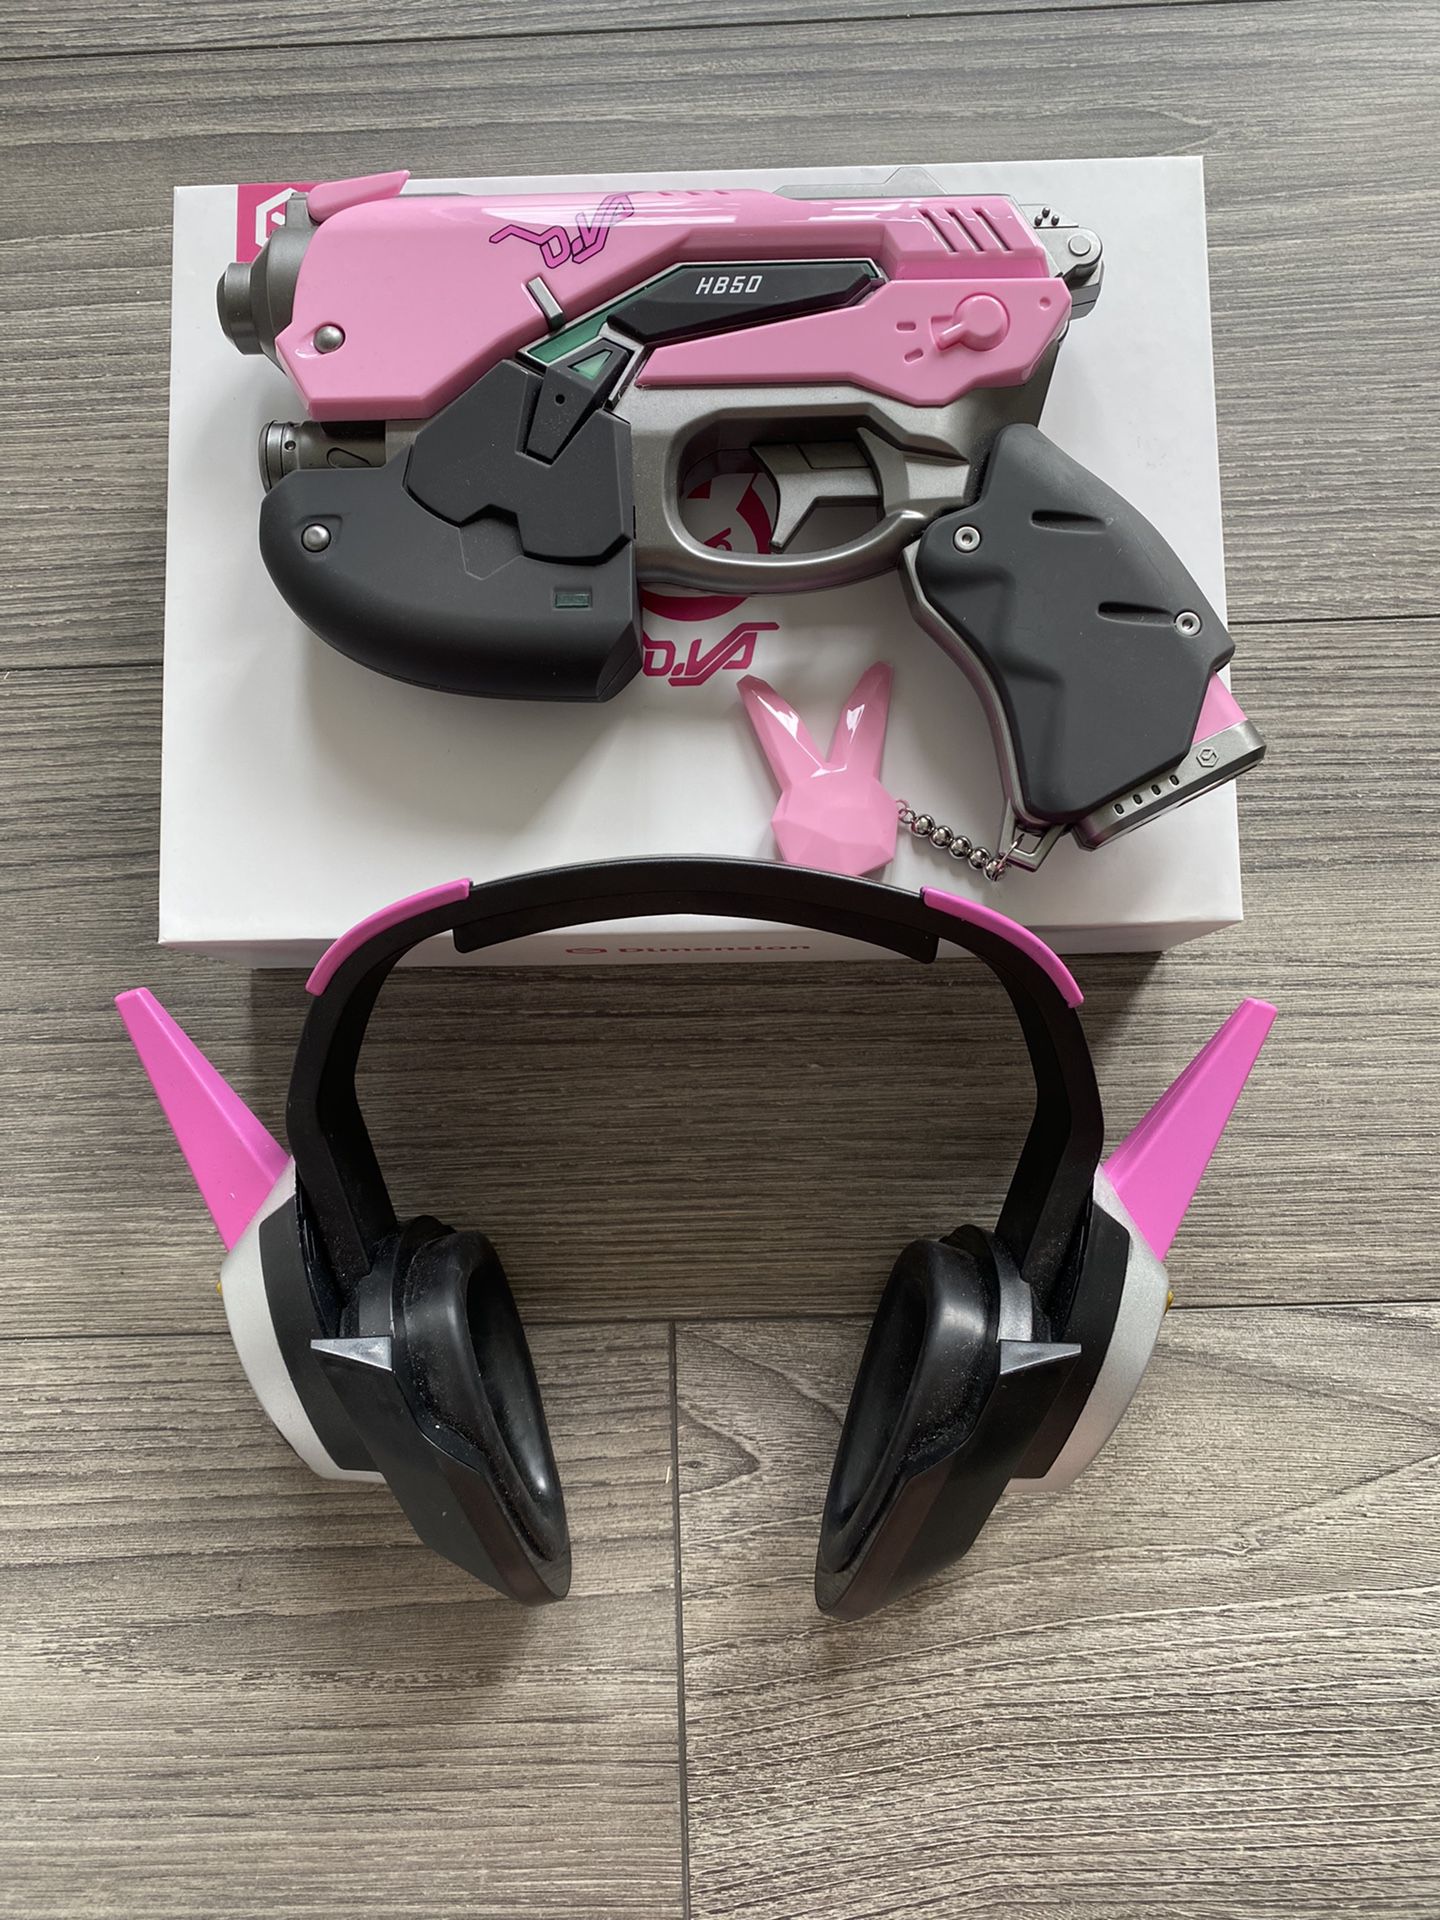 DVA Overwatch USB gun portable charger and headset